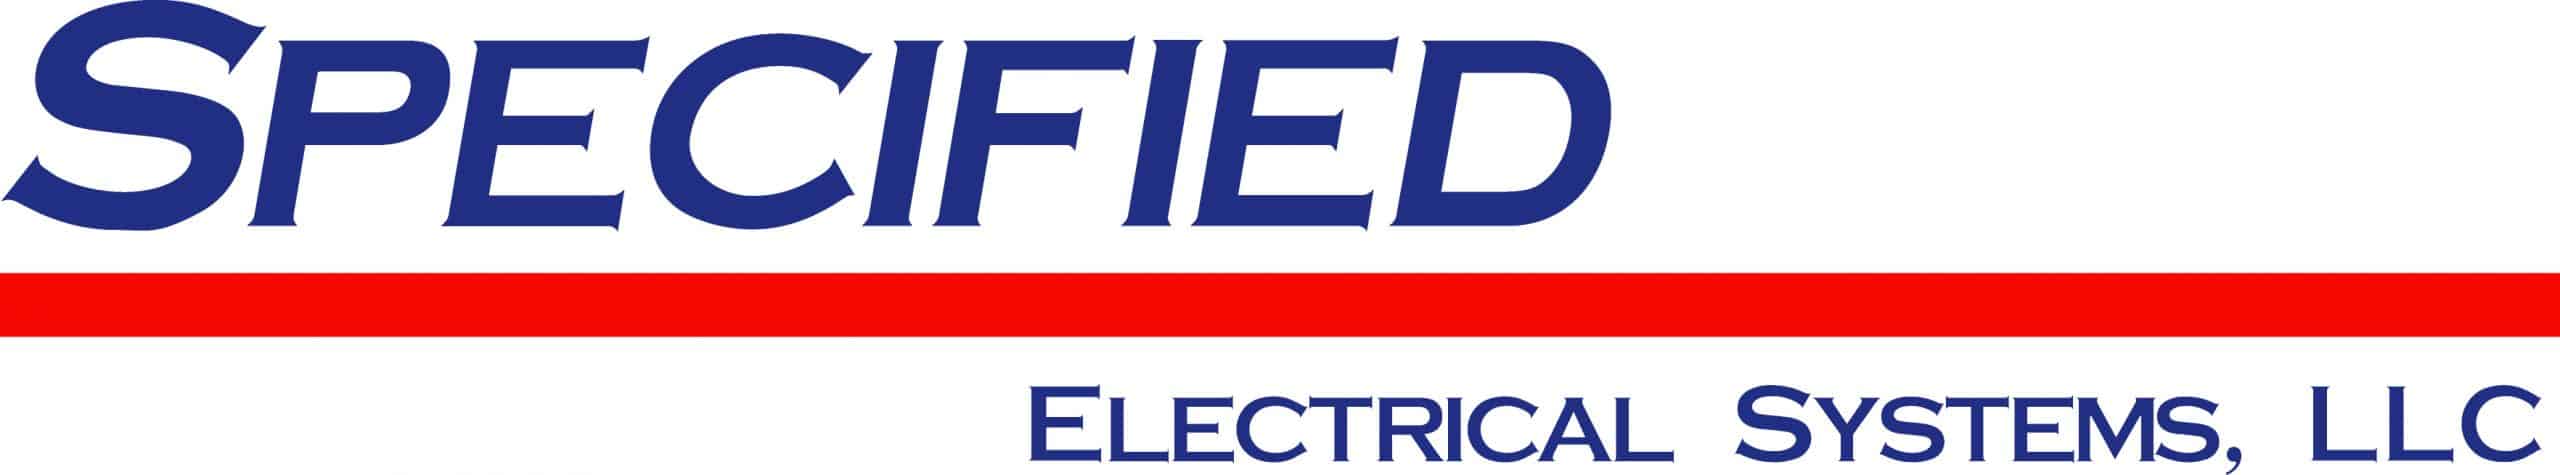 Logo for Specified Electrical Systems